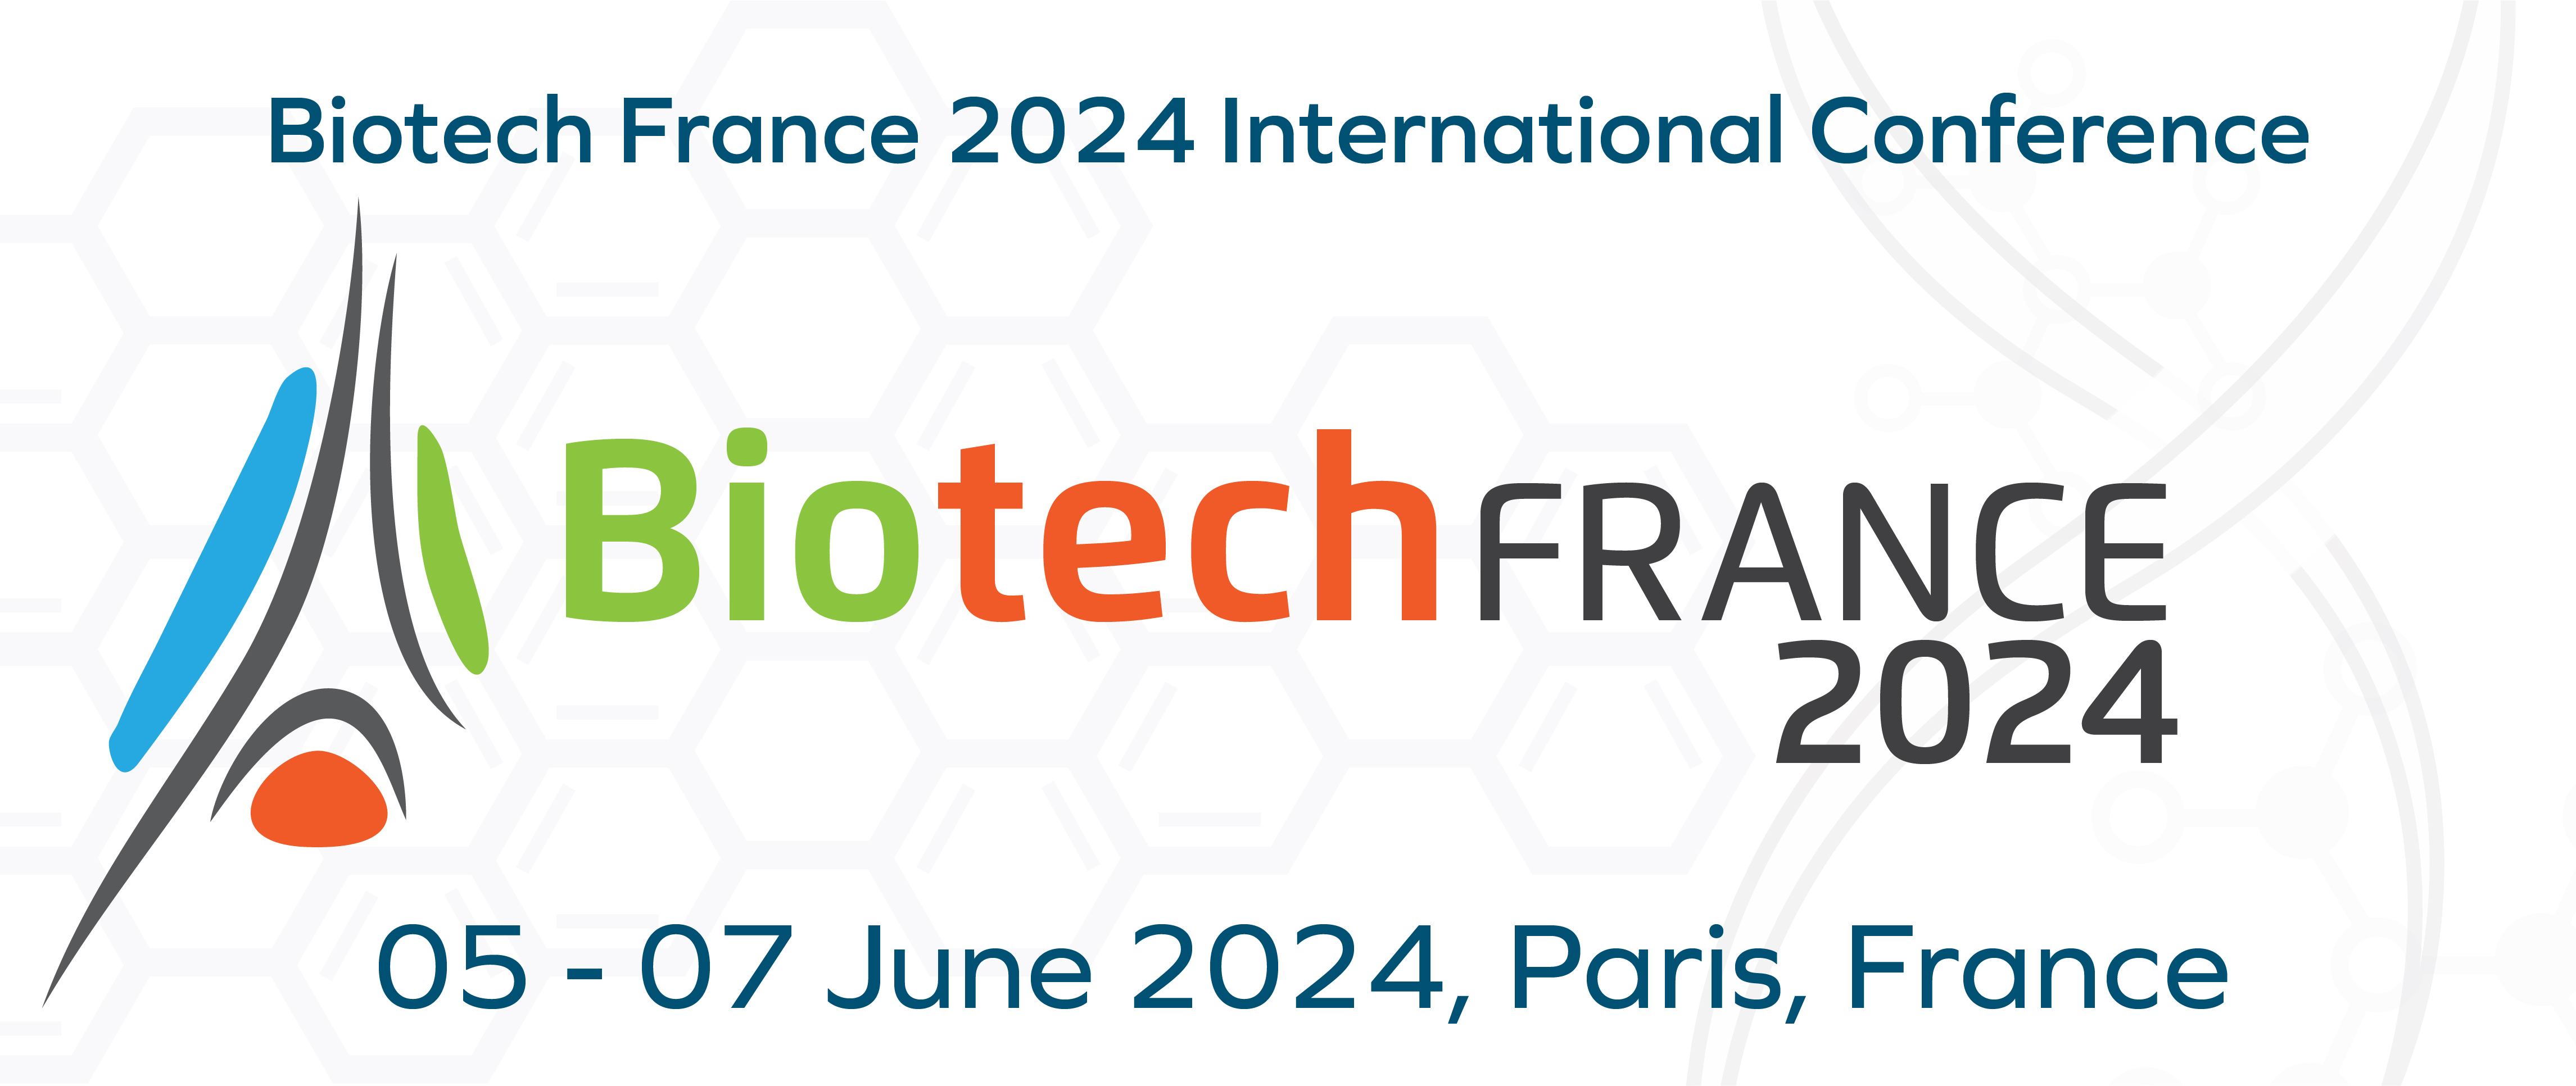 The 6th ed. of Biotech France 2024 International Conference